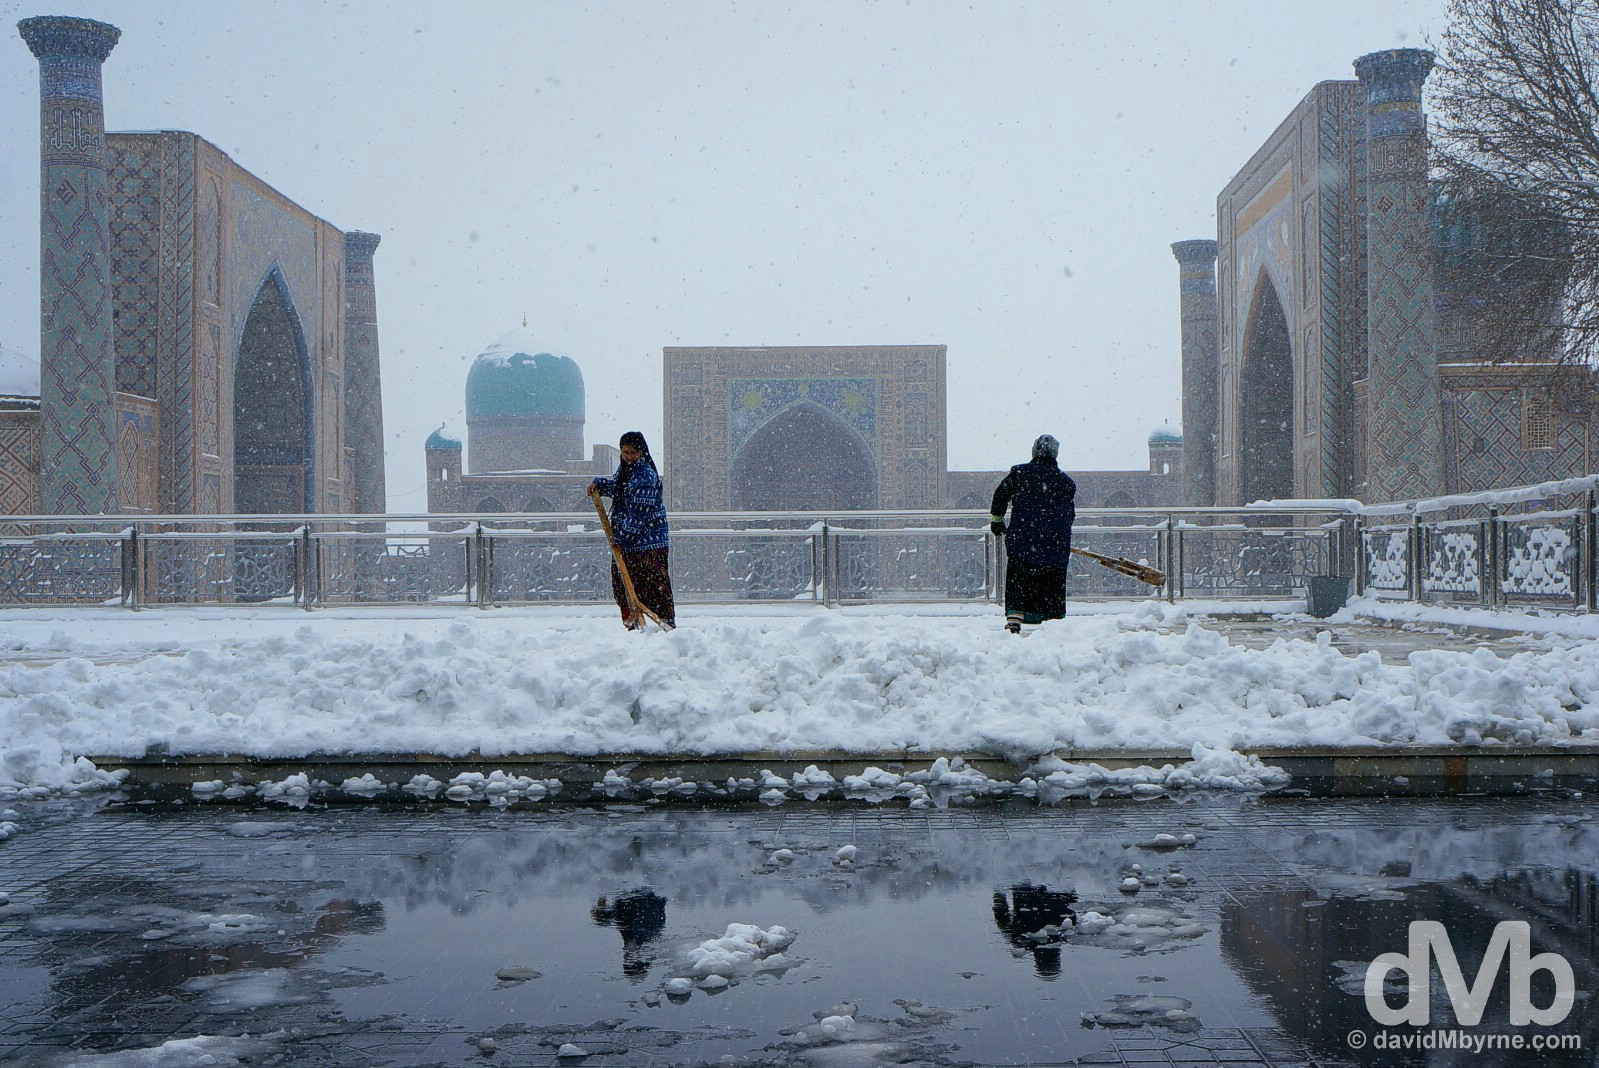 Clearing snow from the viewing platform overlooking the Registan in Samarkand, Uzbekistan. March 10, 2015.